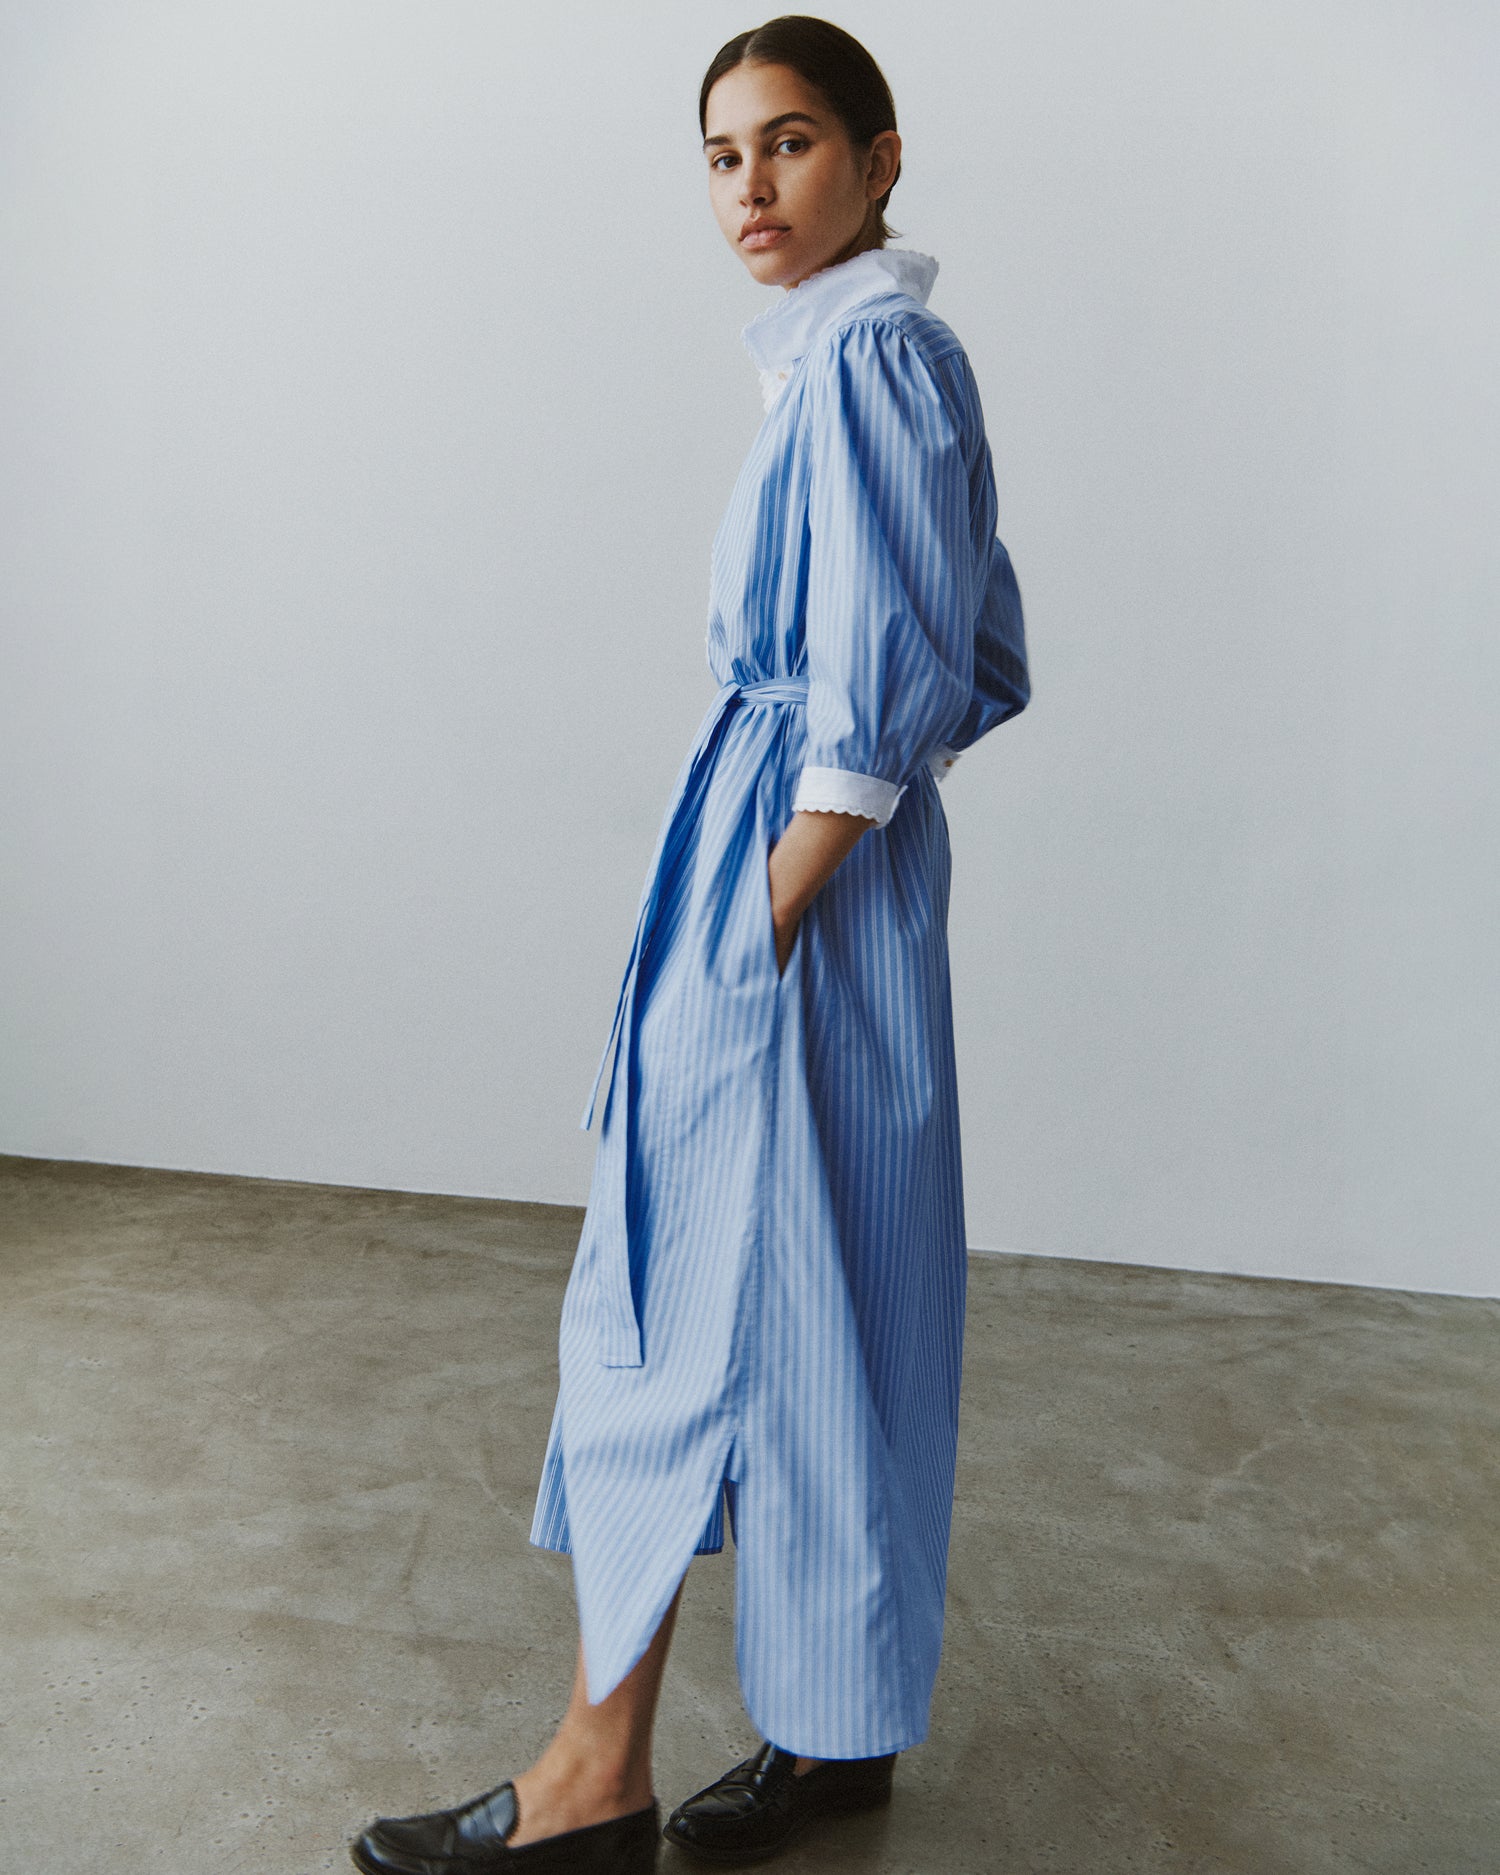 Side view of a woman standing and wearing a midi-length shirt dress in blue striped cotton with a white collar and cuffs.